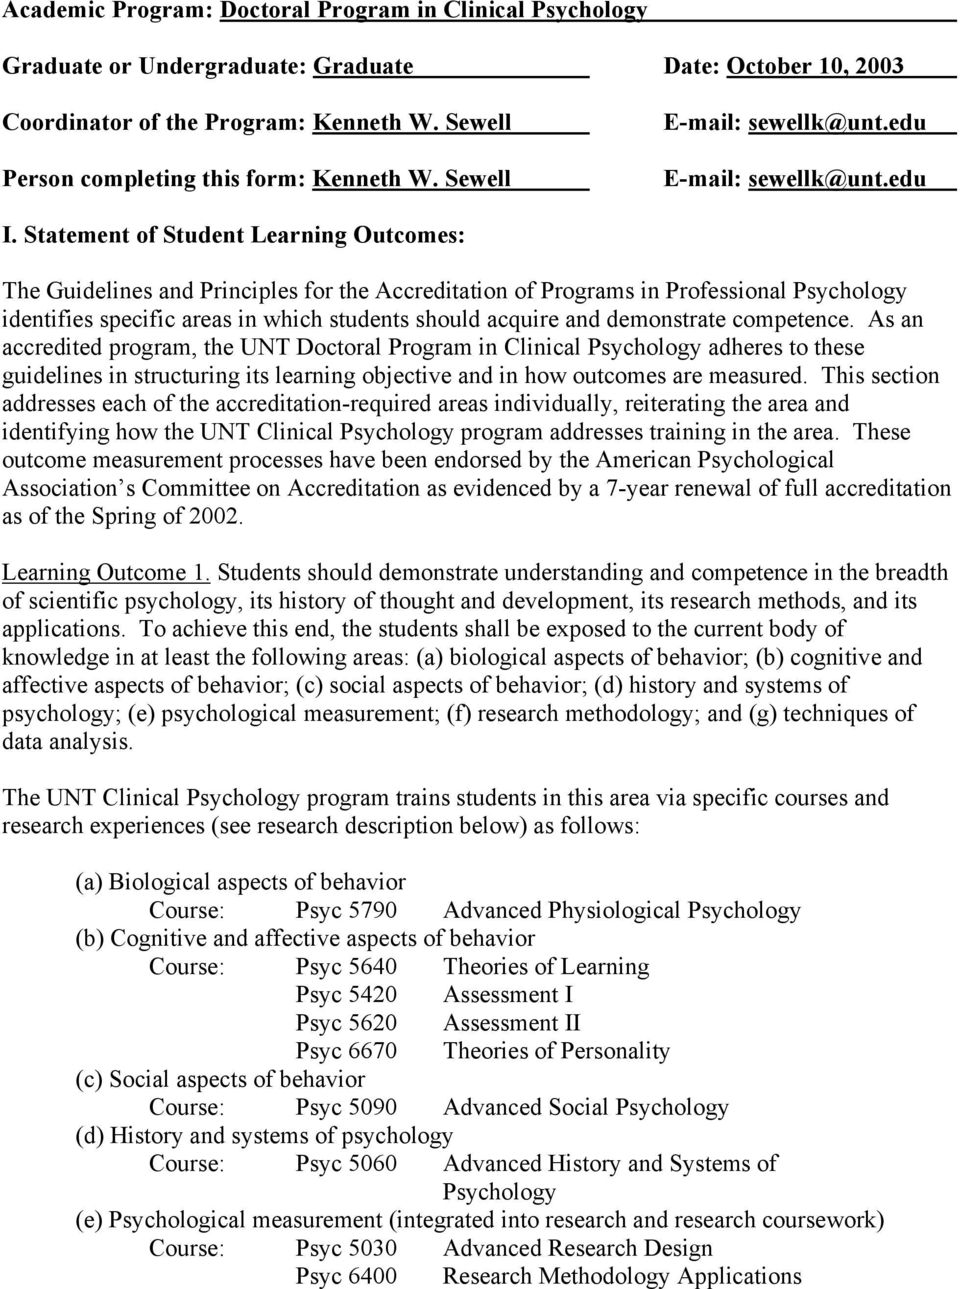 Statement of Student Learning Outcomes: The Guidelines and Principles for the Accreditation of Programs in Professional Psychology identifies specific areas in which students should acquire and